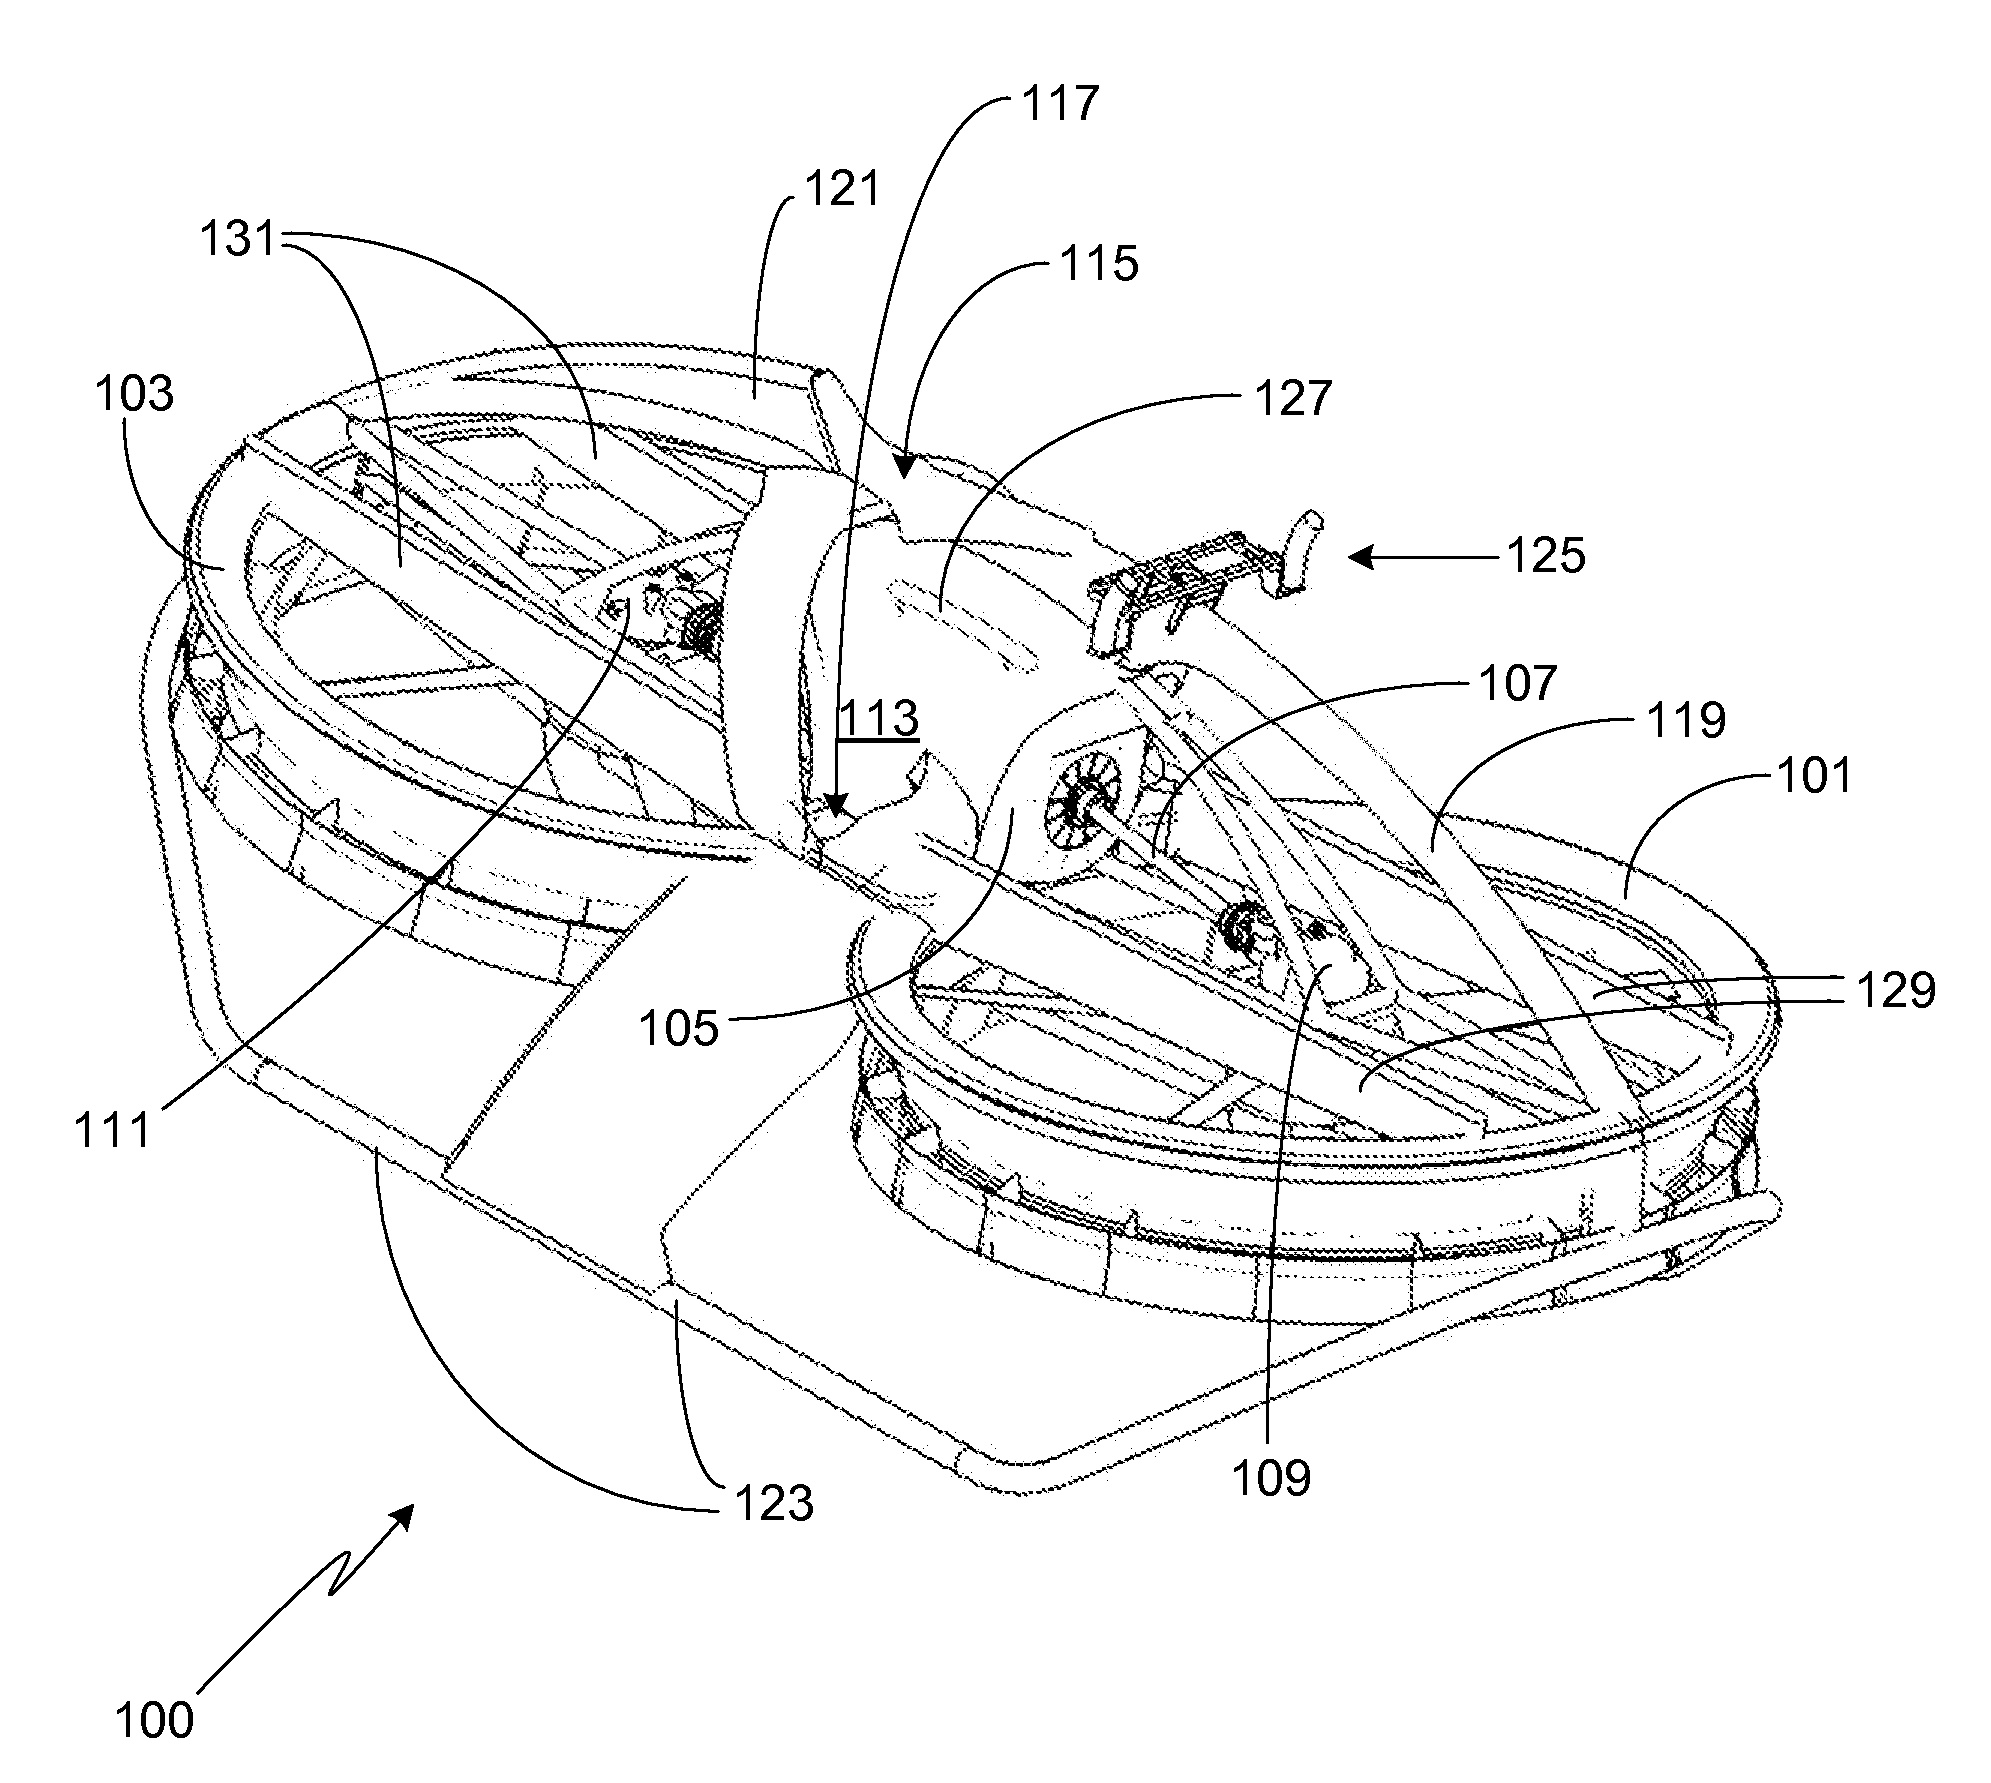 Air-vehicle integrated kinesthetic control system